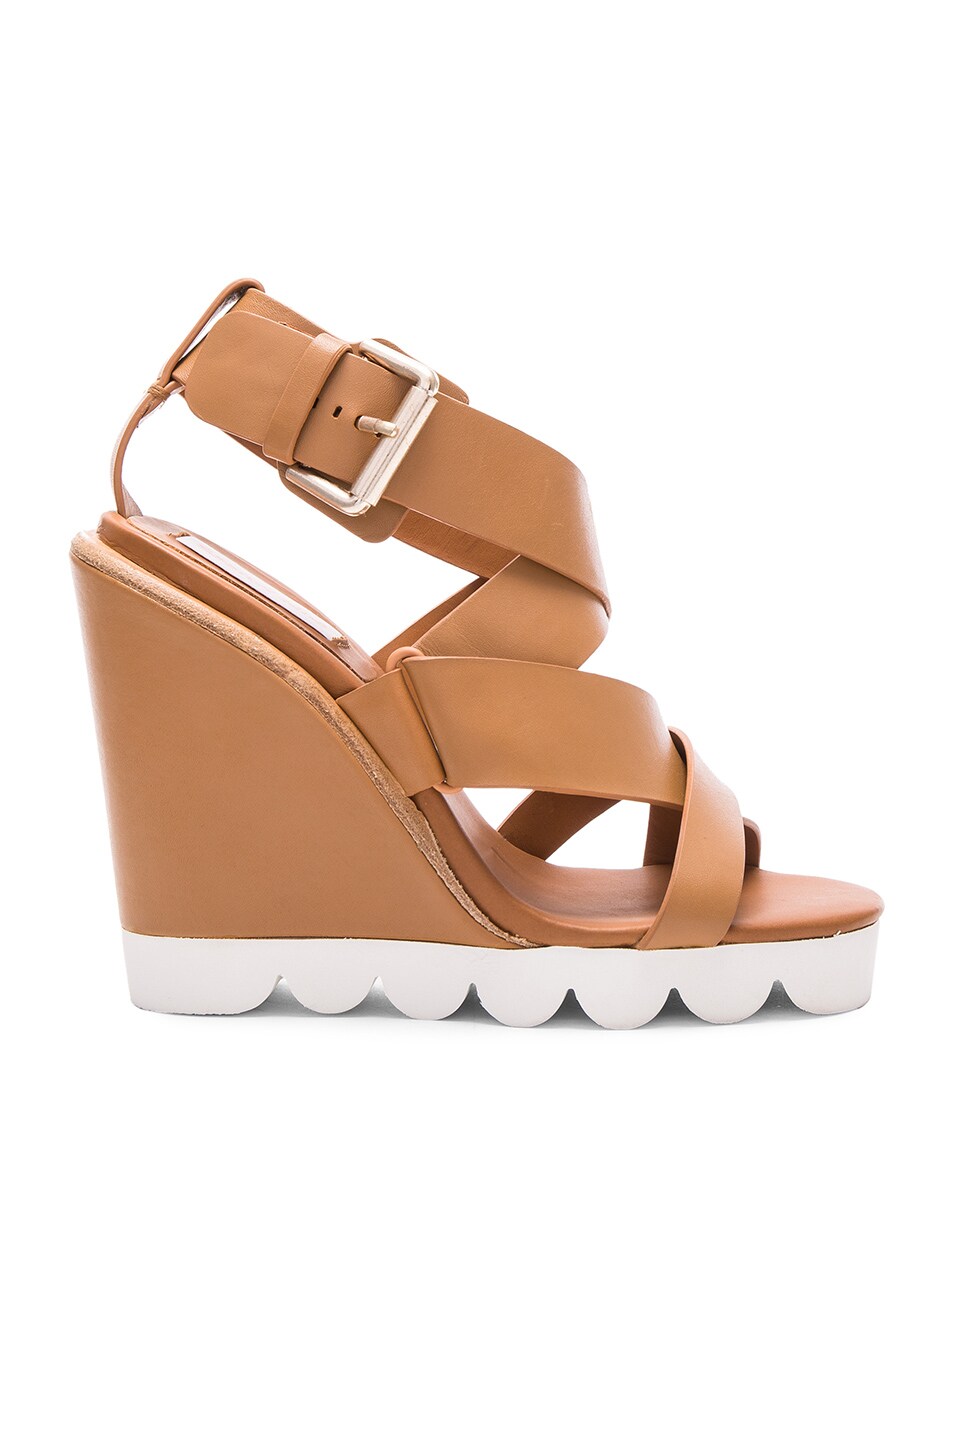 Image 1 of See By Chloe Leather Tiny Wedges in Cognac